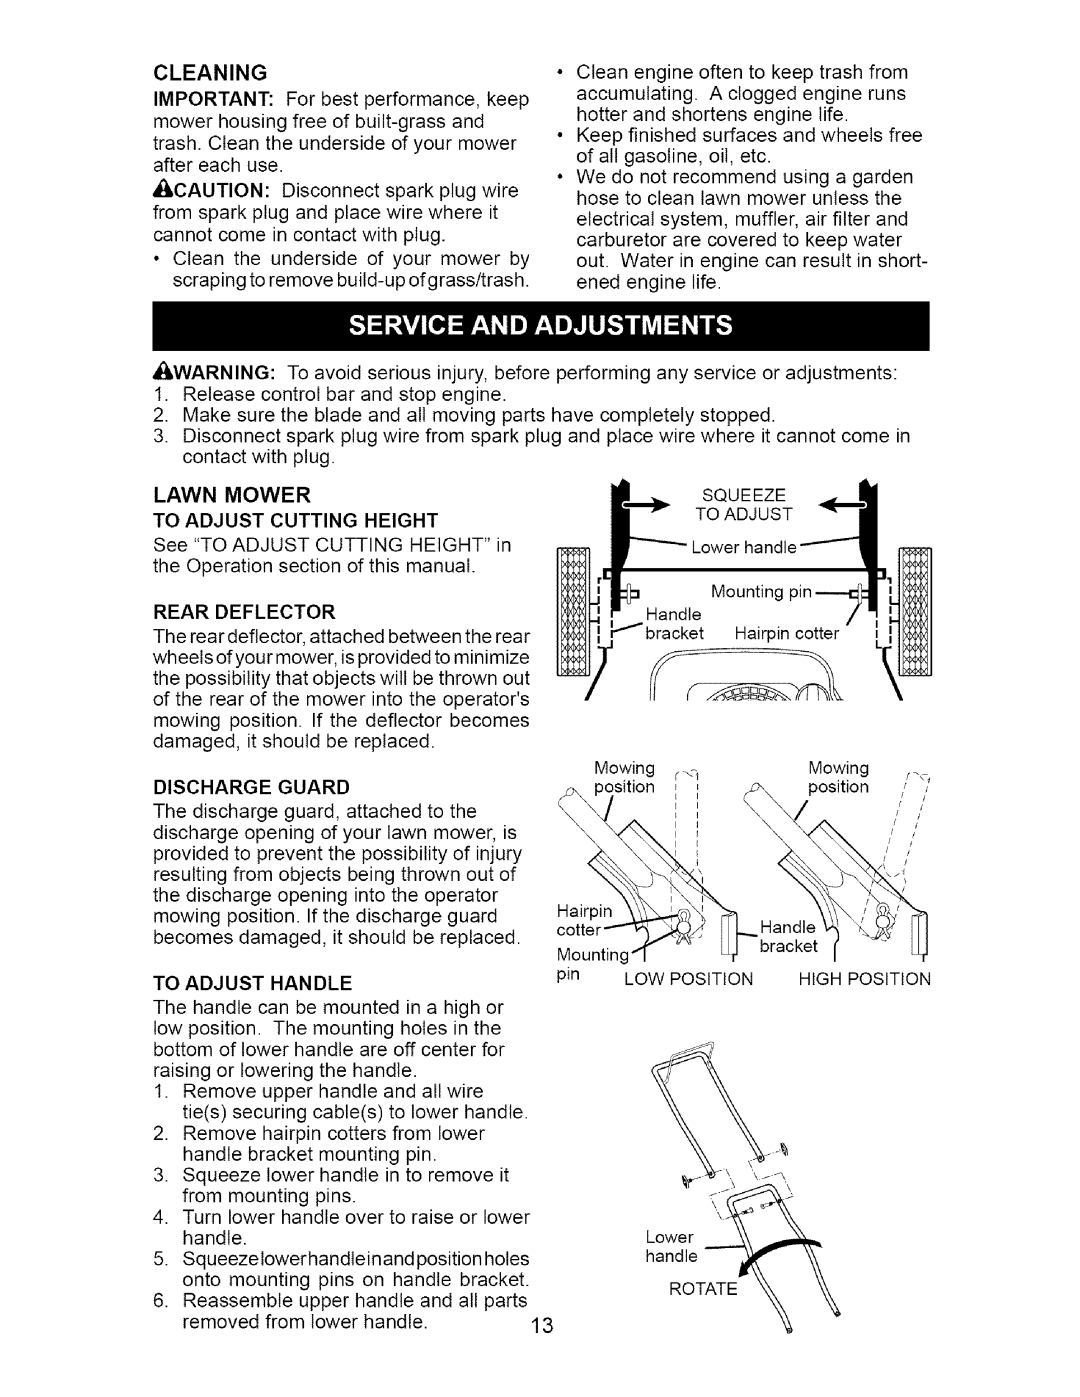 Craftsman 917.385124 owner manual Cleaning, Lawn Mower To Adjust Cutting Height, To Adjust Handle 